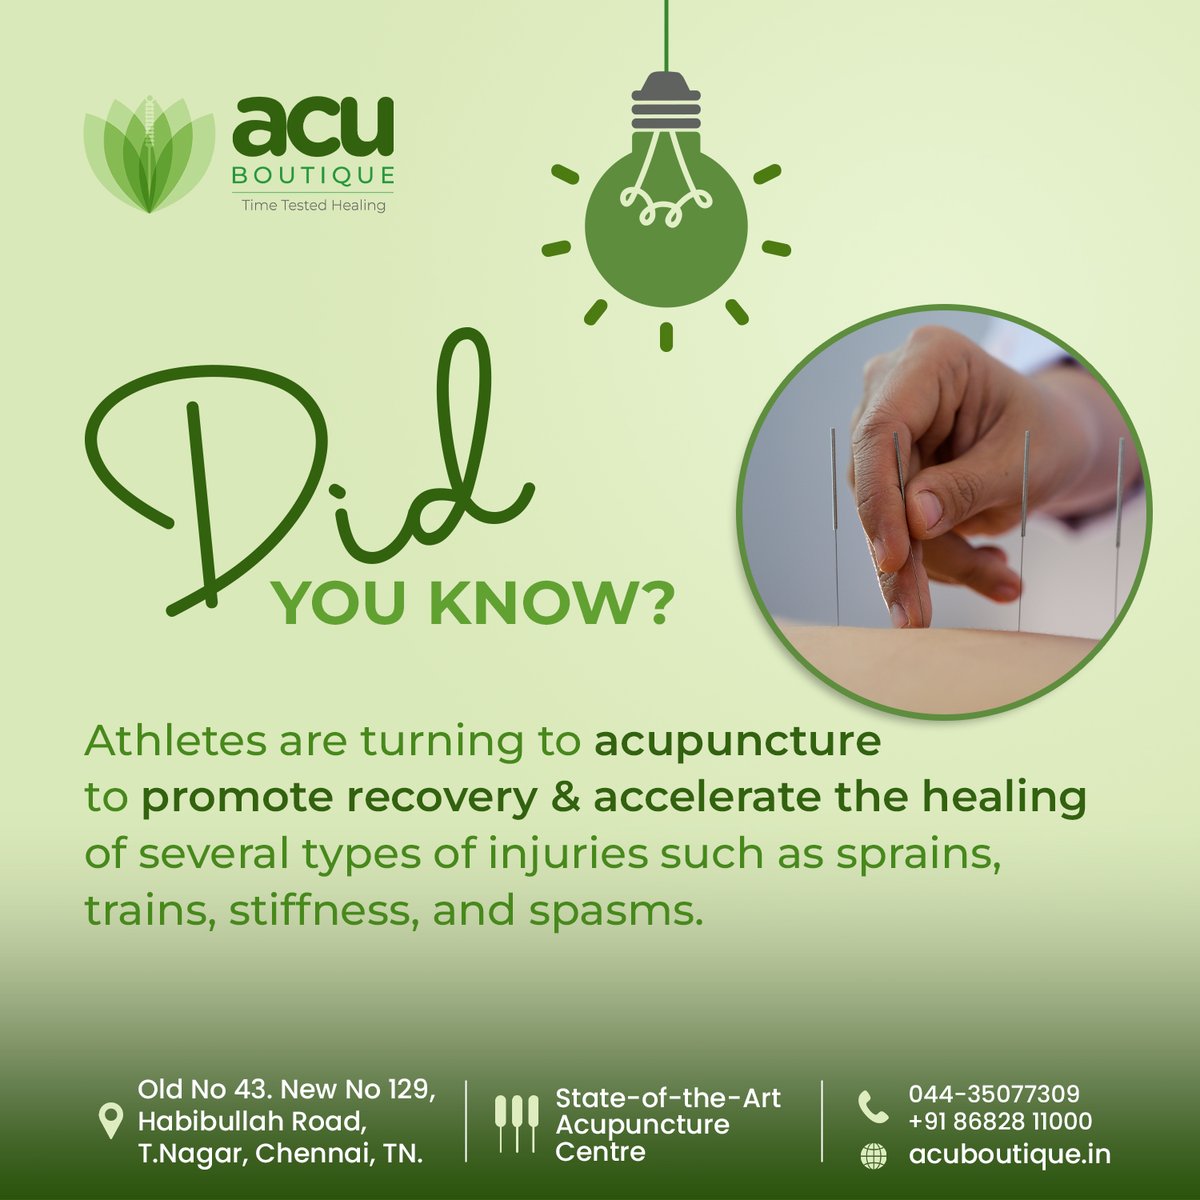 Say goodbye to injuries and hello to healing.

Discover the power of acupuncture for pain relief and faster recovery! 💪 

To Book an Appointment, Call : 044 - 3507 7309 

#acuboutique #aunctureHeals #painrelief #painreliever #painrelief #acupunctureclinic #didyouknow